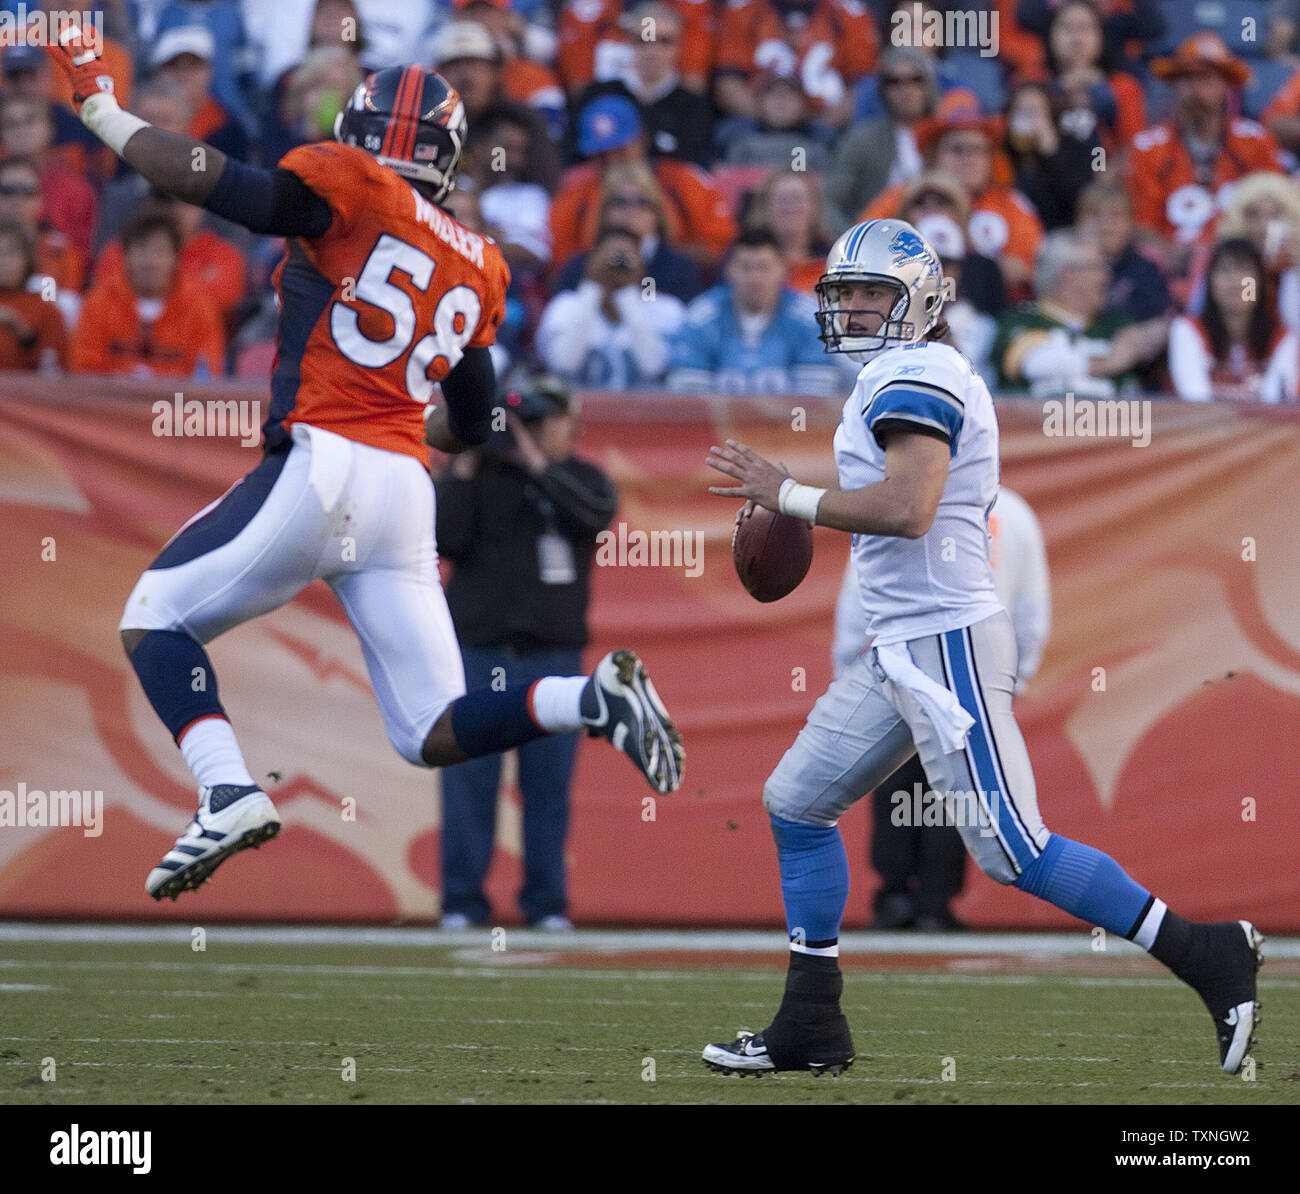 Denver Broncos linebacker Von Miller leaps to pressure Detroit Lions  quarterback Matthew Stafford in the second half at Sports Authority Field  at Mile High in Denver on October 30, 2011. Detroit crushed